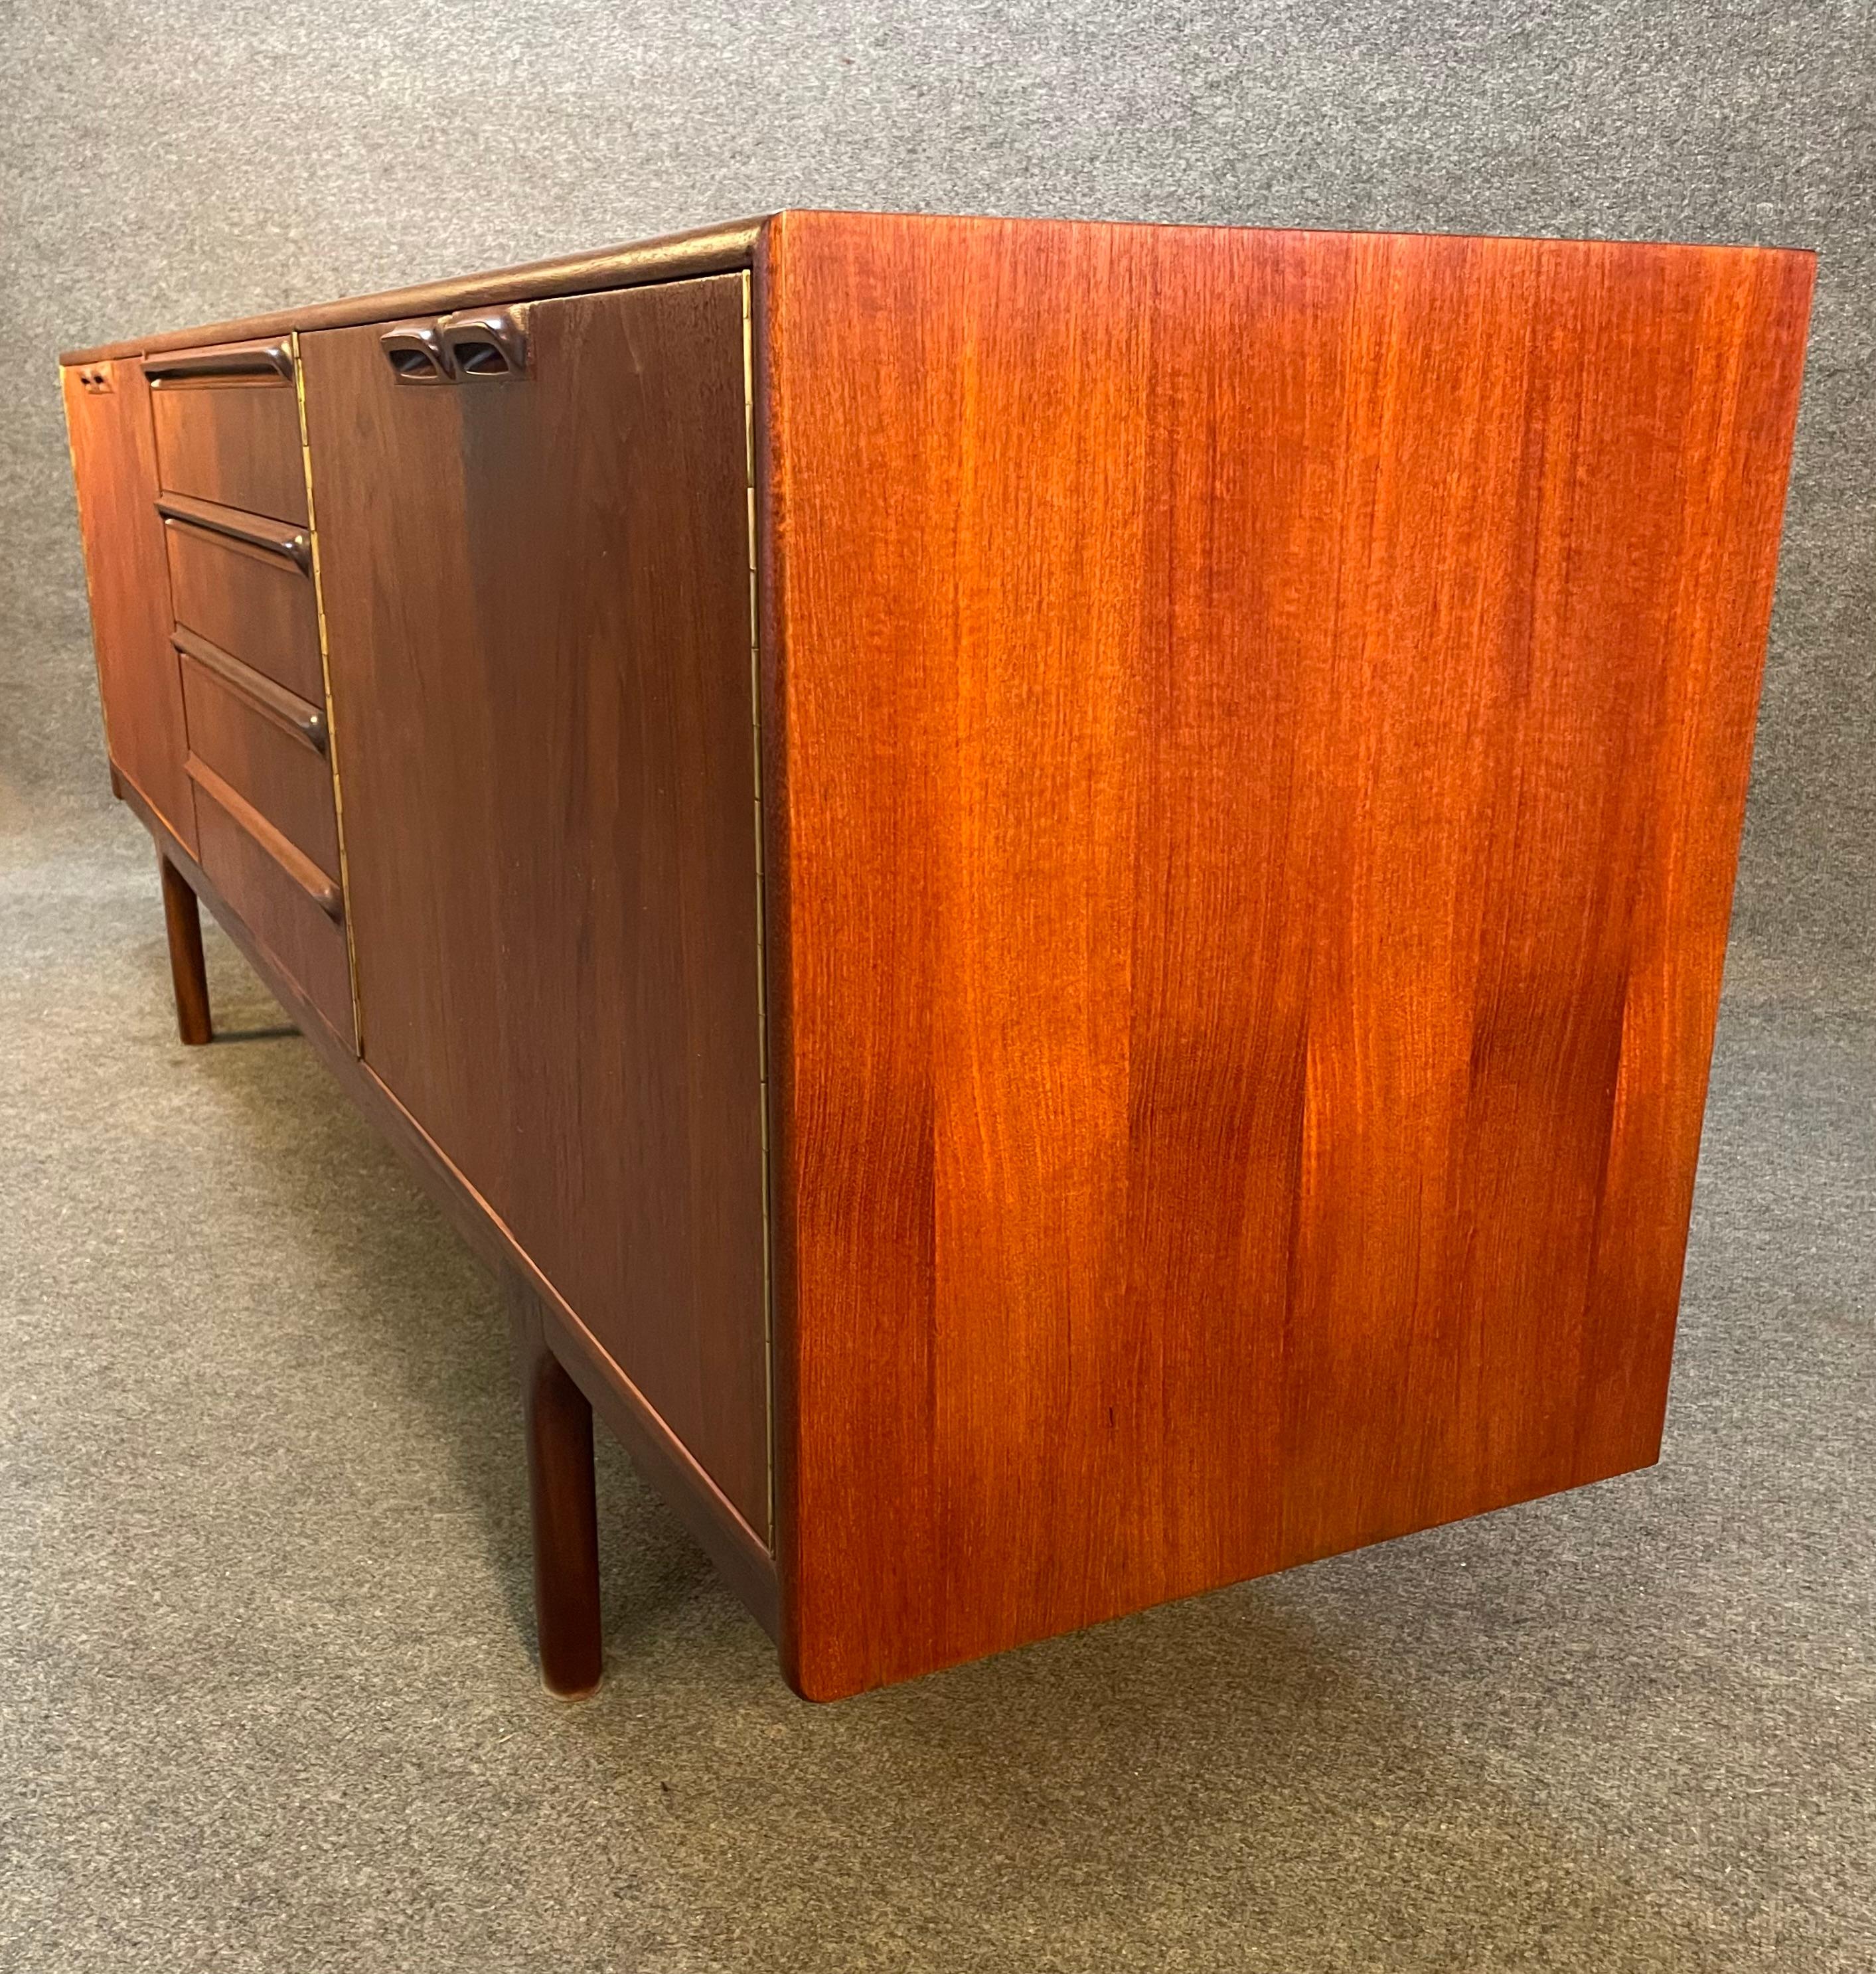 Here is a beautiful British Mid-Century Modern credenza model 